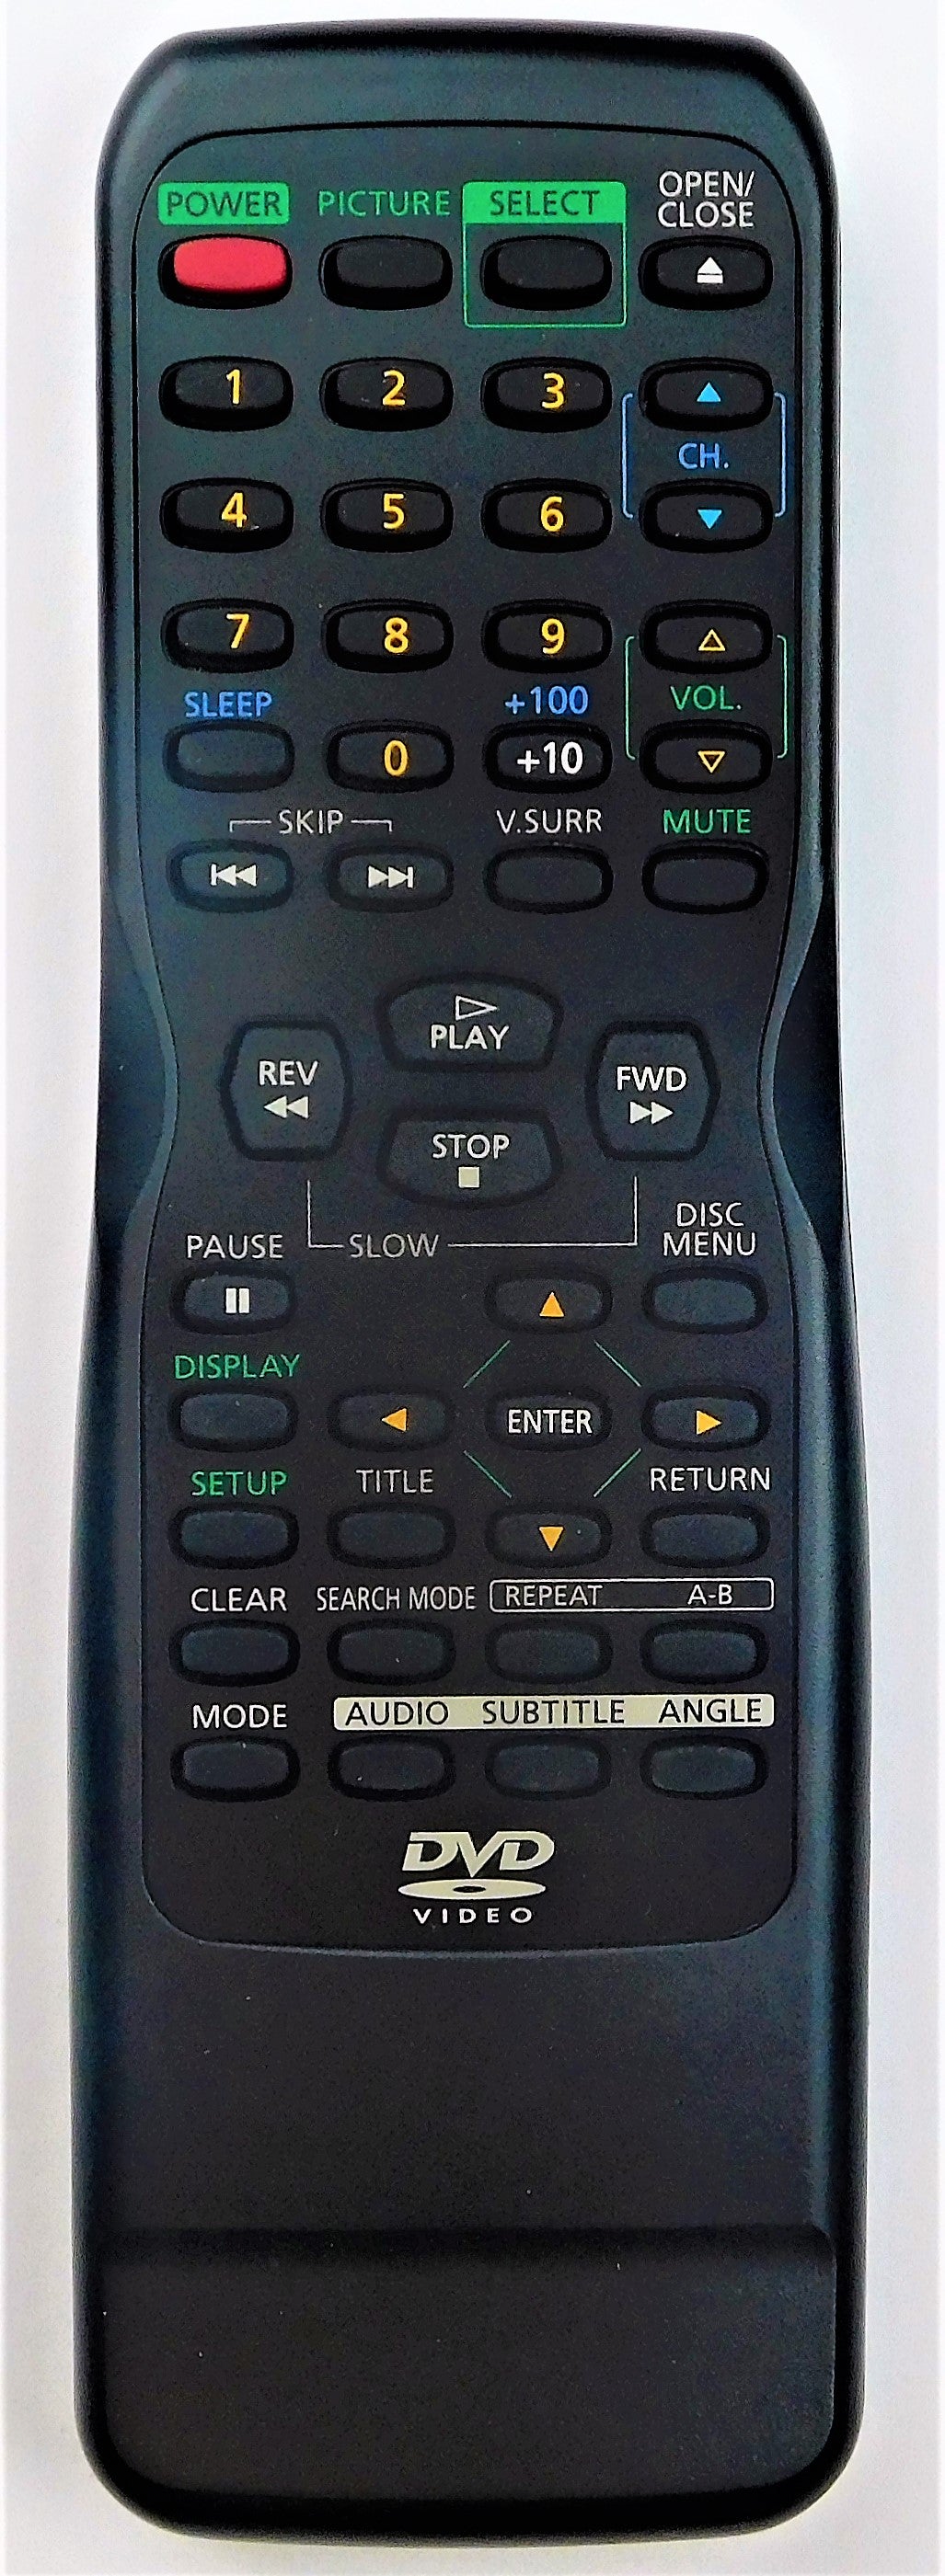 OEM replacement remote control for Symphonic CRT TV & DVD COMBOs NE228UD